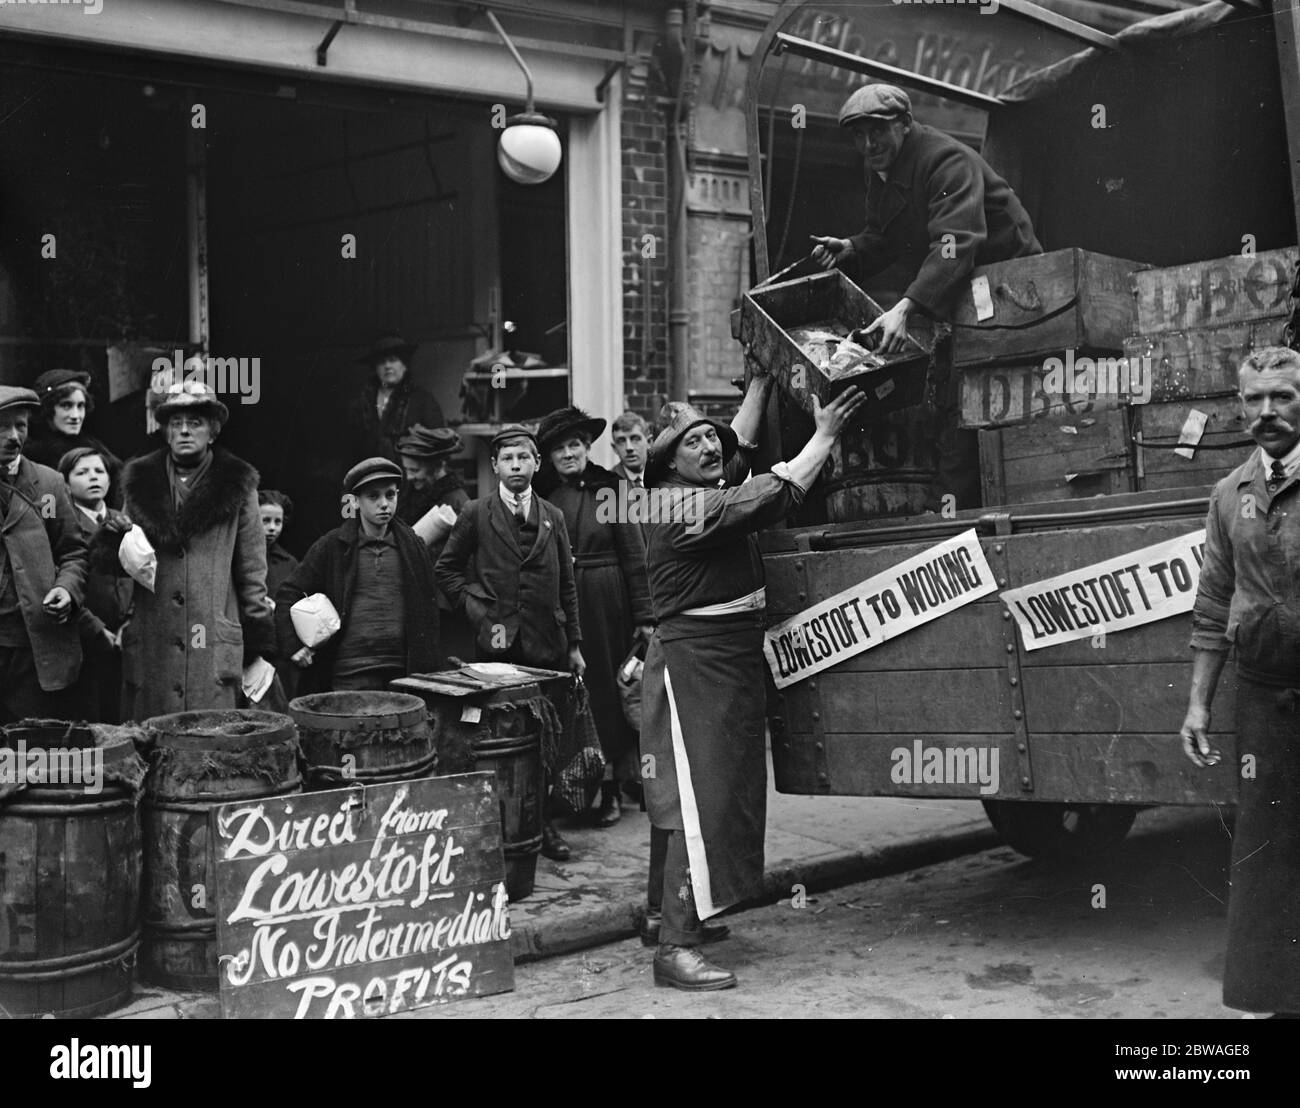 Mr Wasley , a fishmonger of Woking , brings his fish direct from Lowestoft to his shop by motor lorry . Here he unloads his lorry . 18 October 1919 Stock Photo